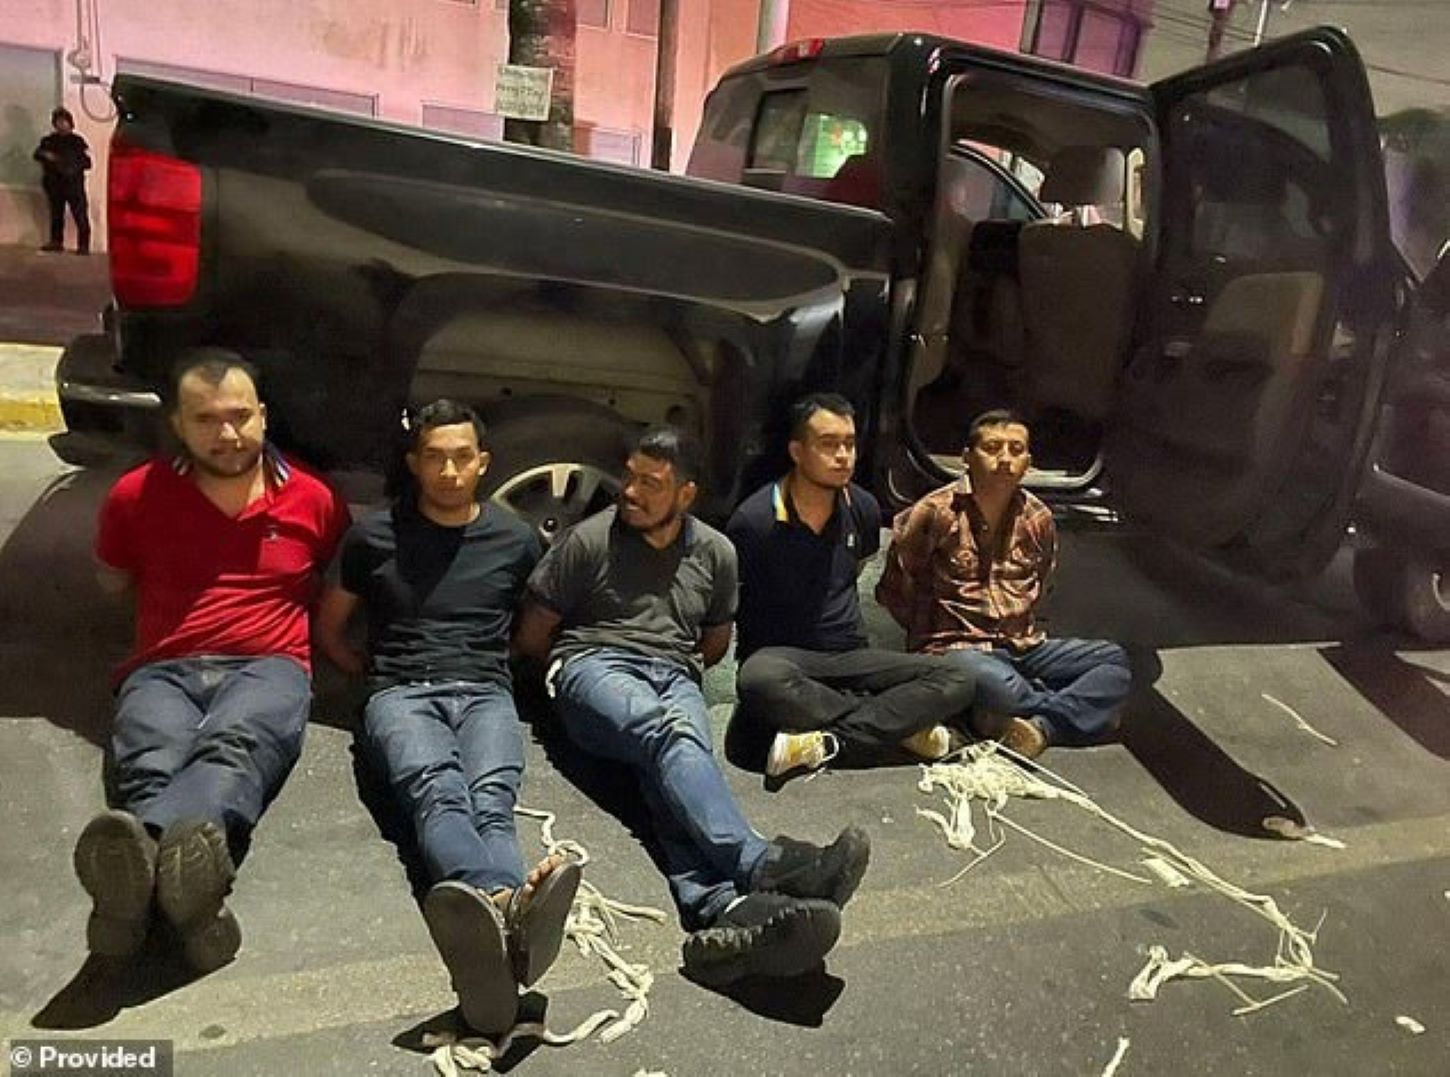 Five men delivered to police by Cartel with an apology note